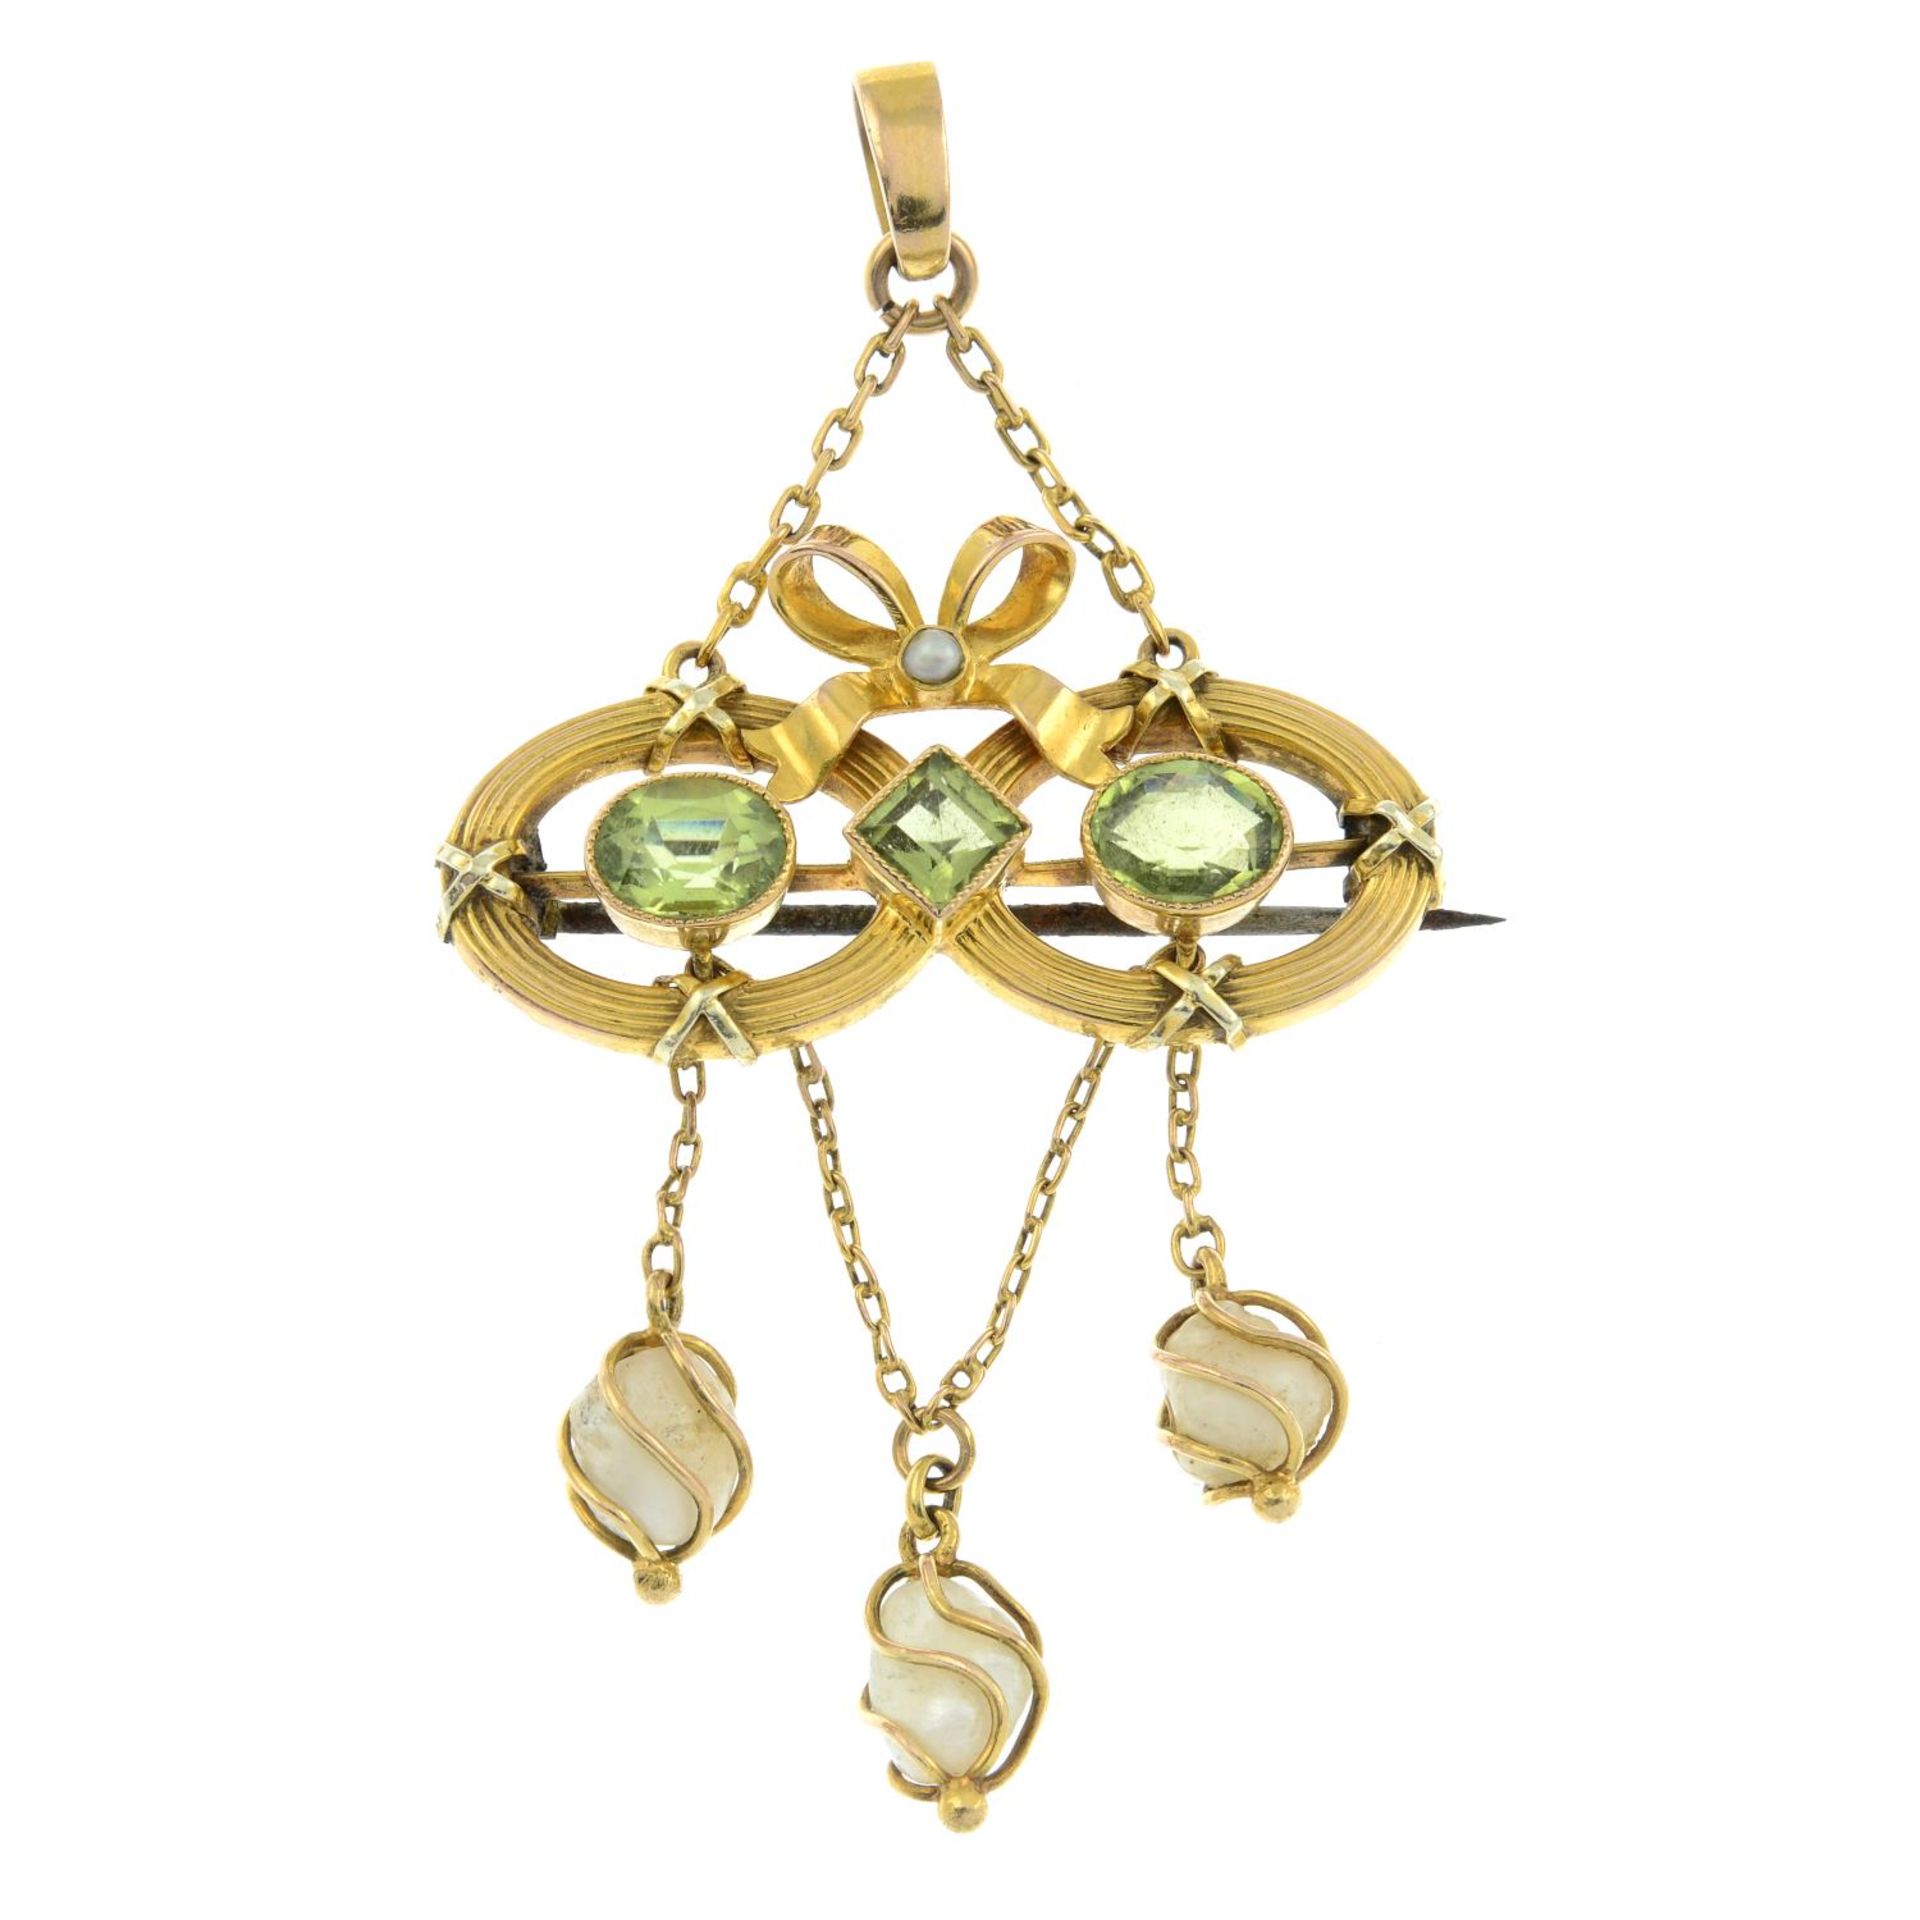 An early 20th century 9ct gold peridot and baroque pearl pendant,